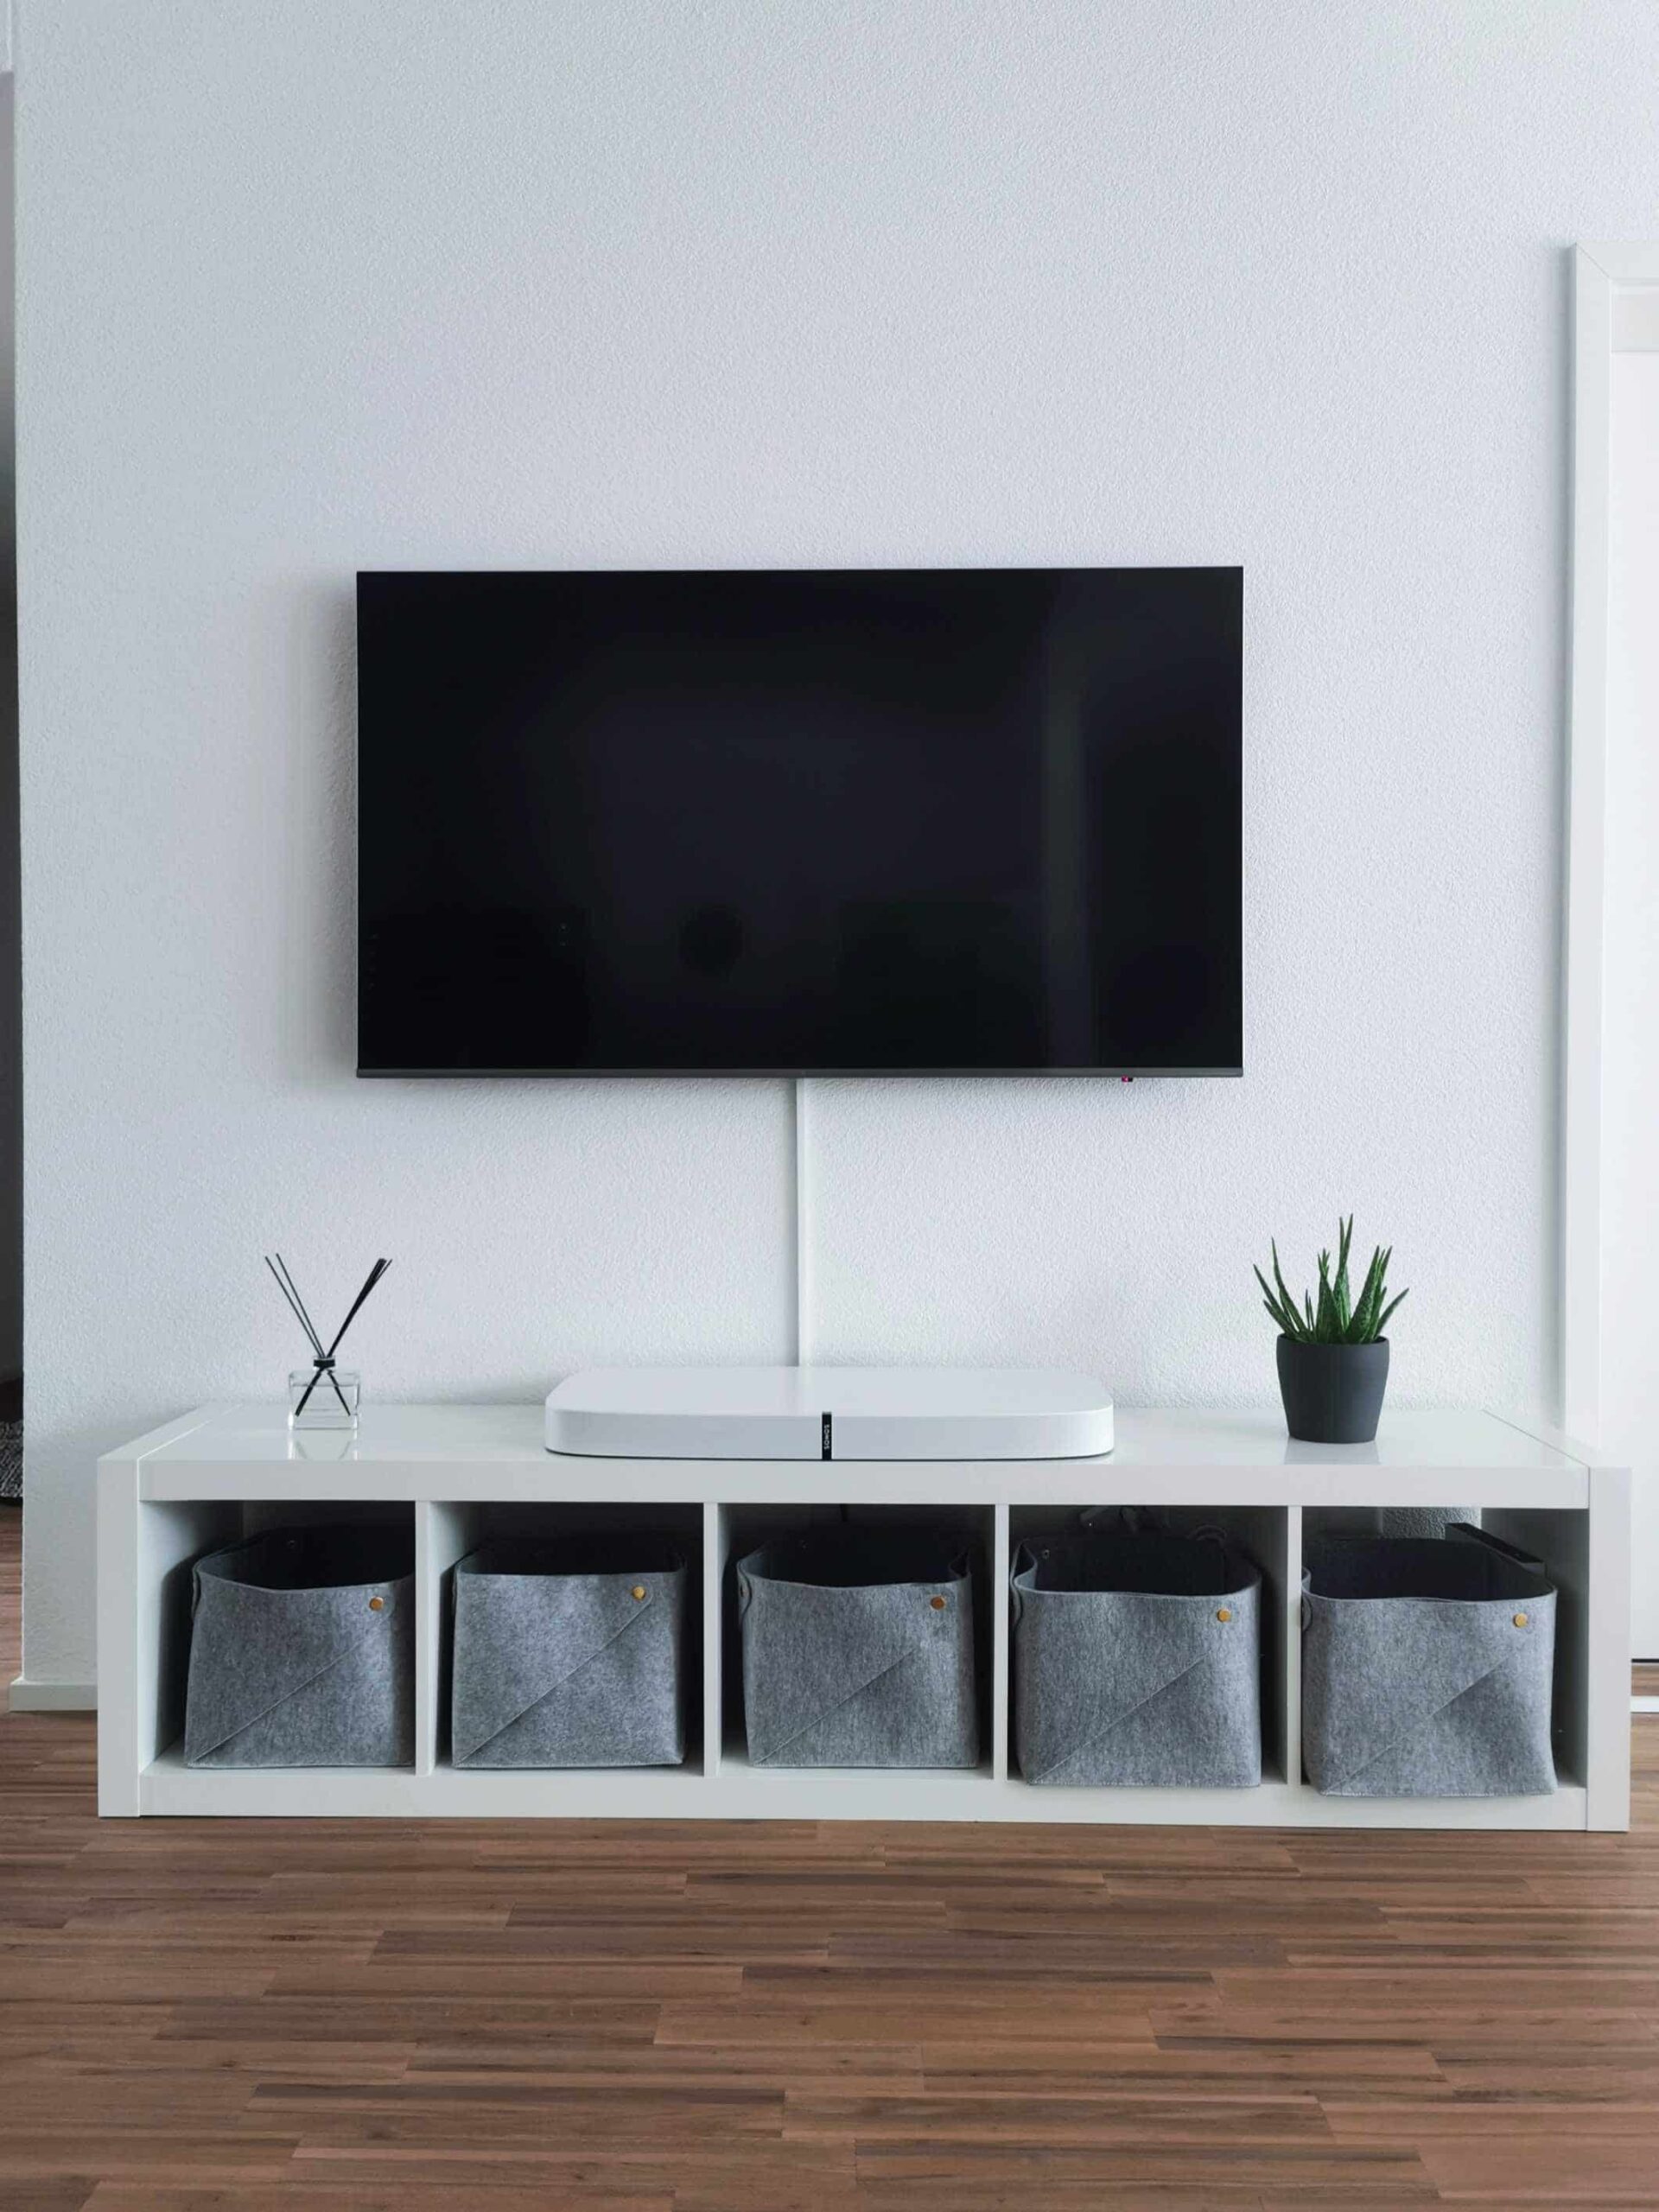 How to Start a Tv Mounting Business 